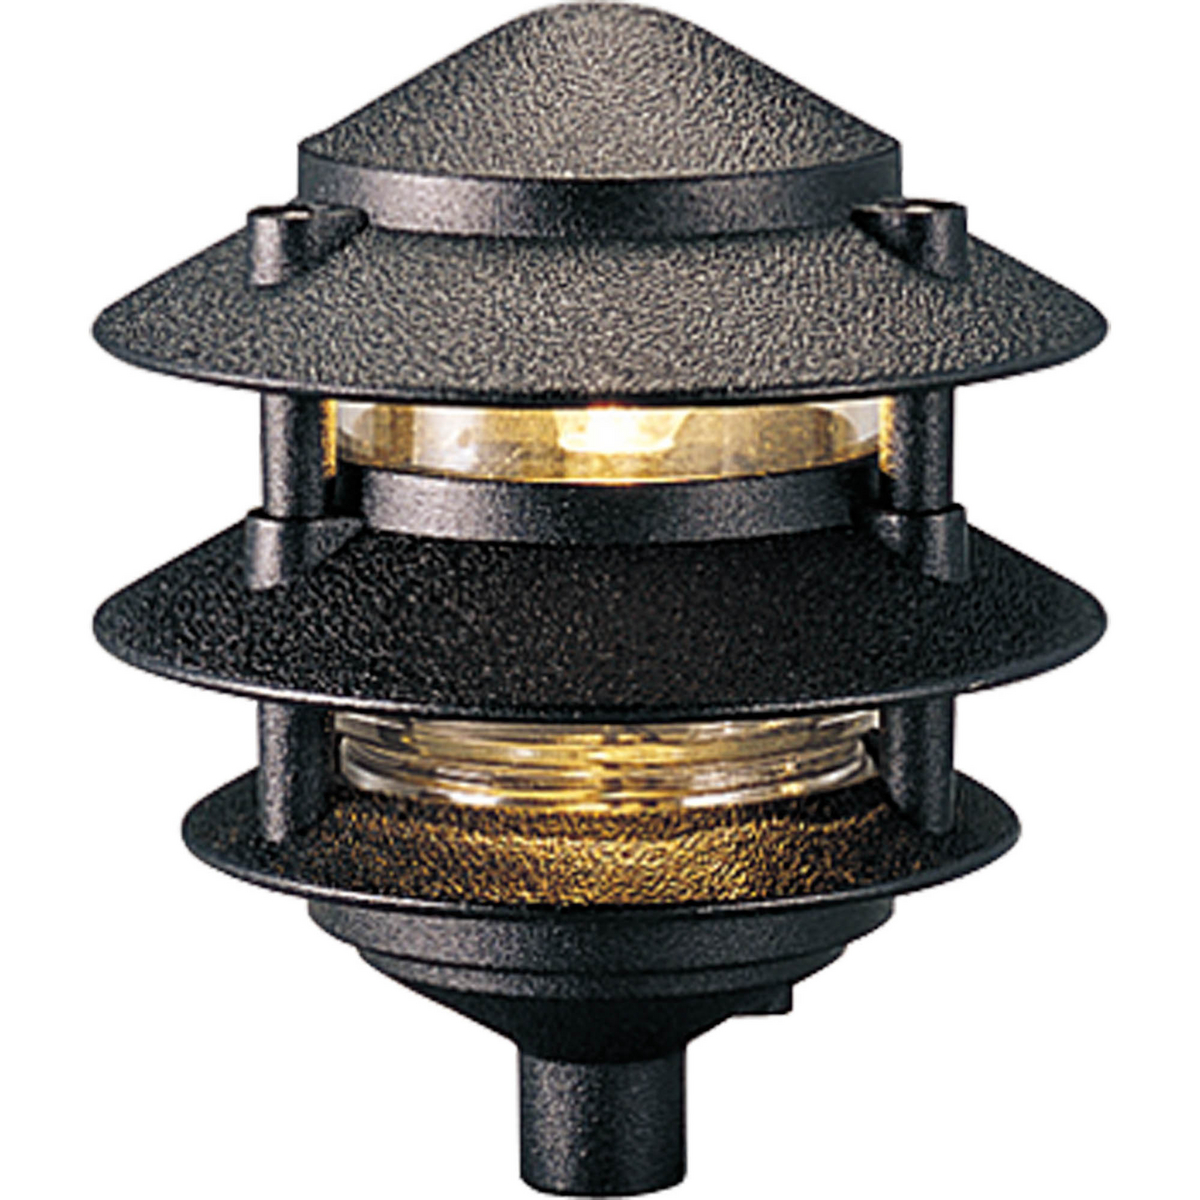 Low voltage pagoda three-tier style one-light die-cast aluminum landscape with a clear glass liner in a Black finish. 1/2 IP threaded fitting. Connector, stake and 18w T5 wedge base lamp included. Units must be wired to a 12V transformer with proper capacity.